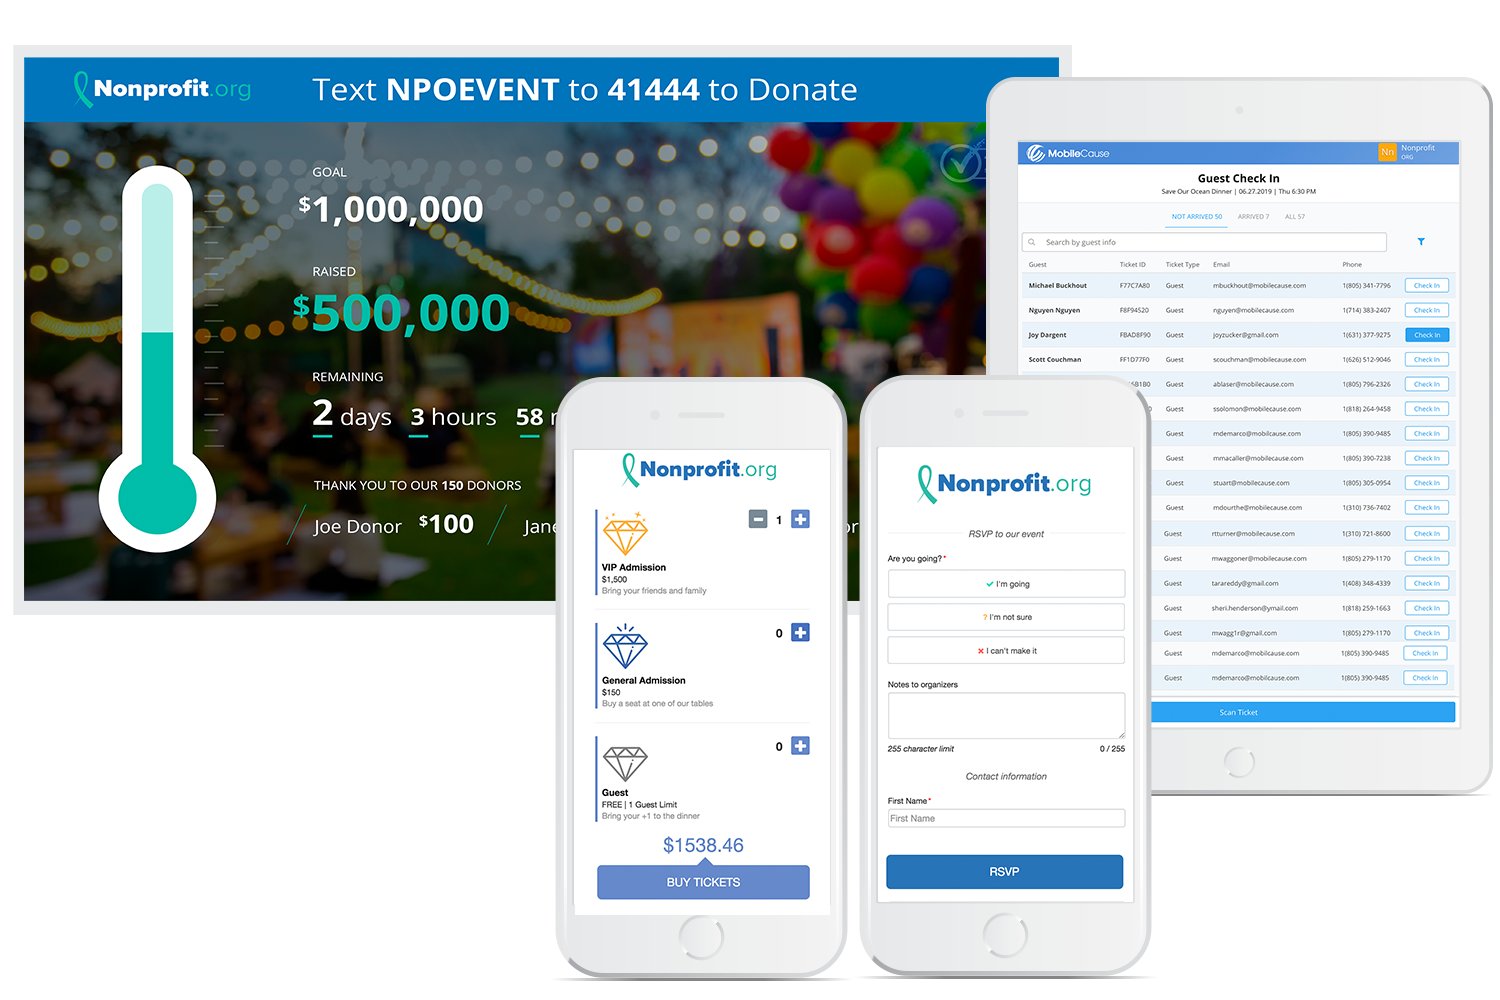 Nonprofit.org_Demo_EventWorks_MockUp_Final_Perfect_3_22_19